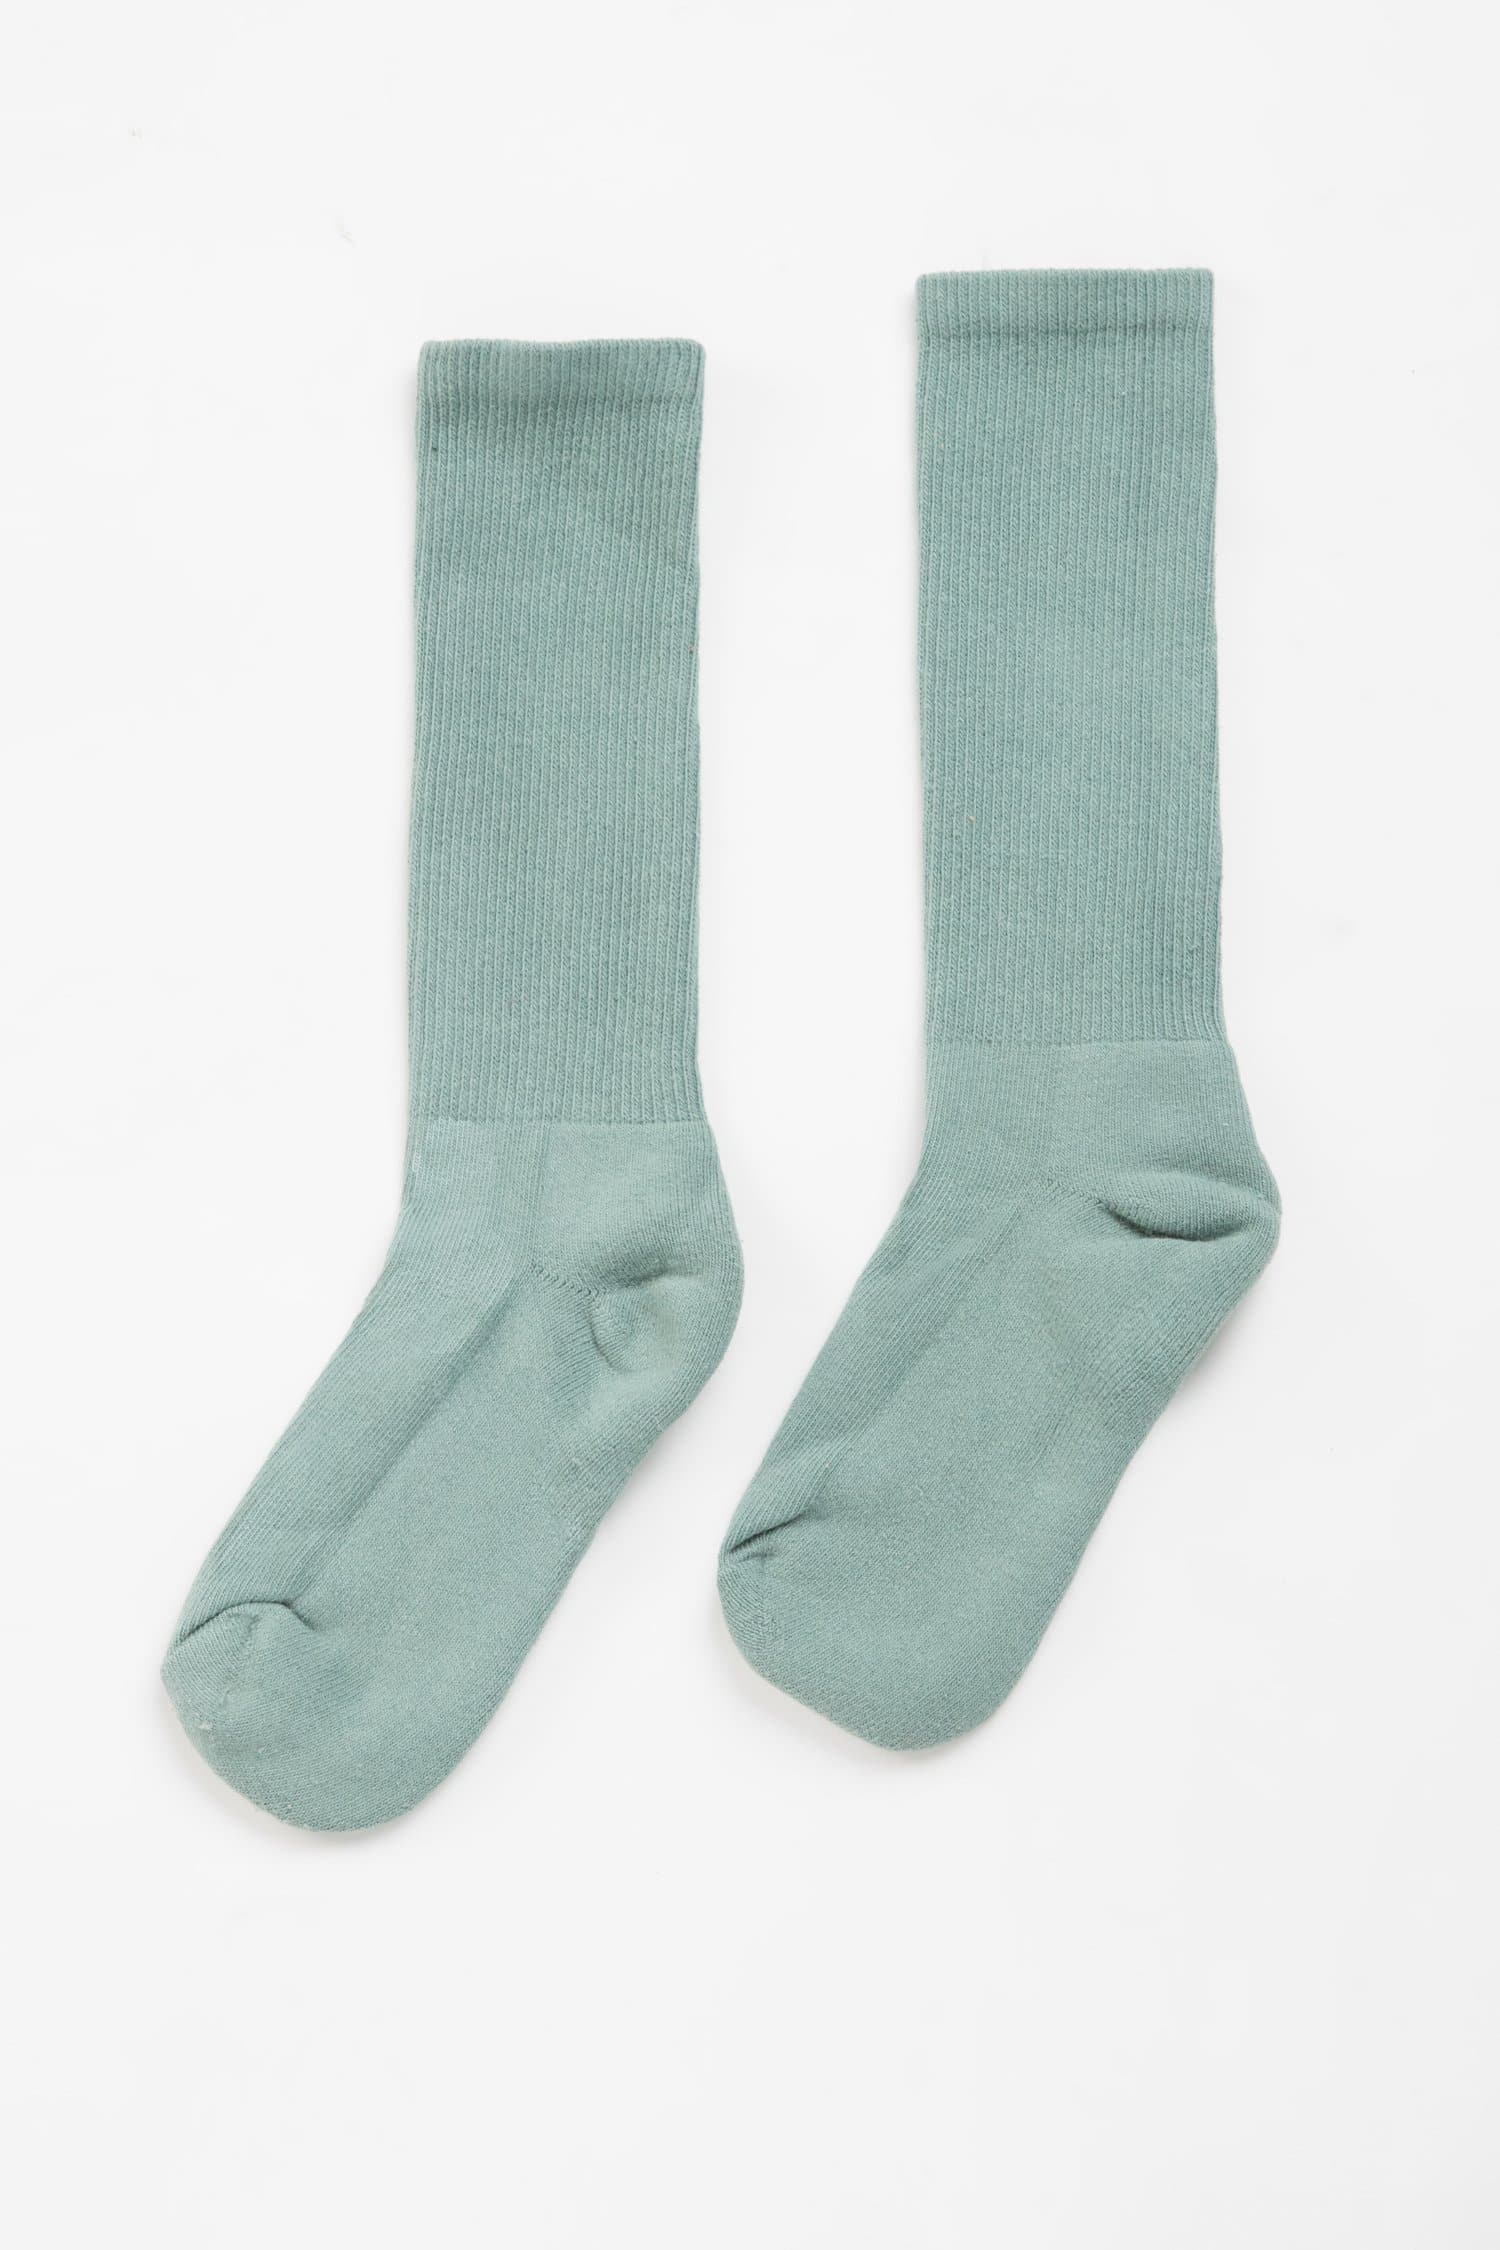 Supreme Cotton Green No Show Unisex Socks Pack of 2 – Unttld Jeans